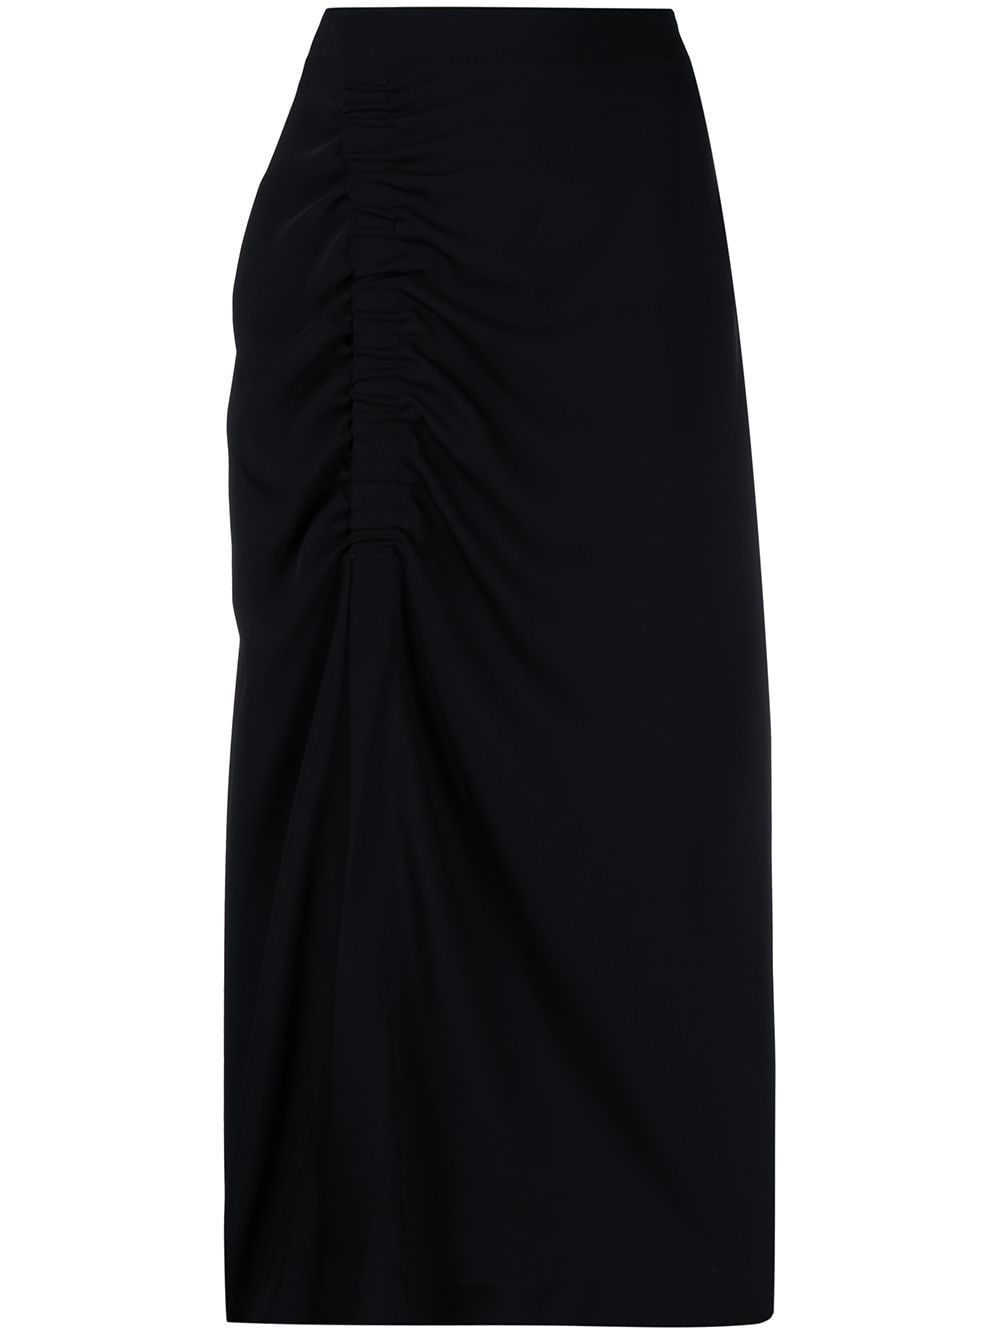 P.A.R.O.S.H. side slit ruched high-waisted skirt - Black von P.A.R.O.S.H.